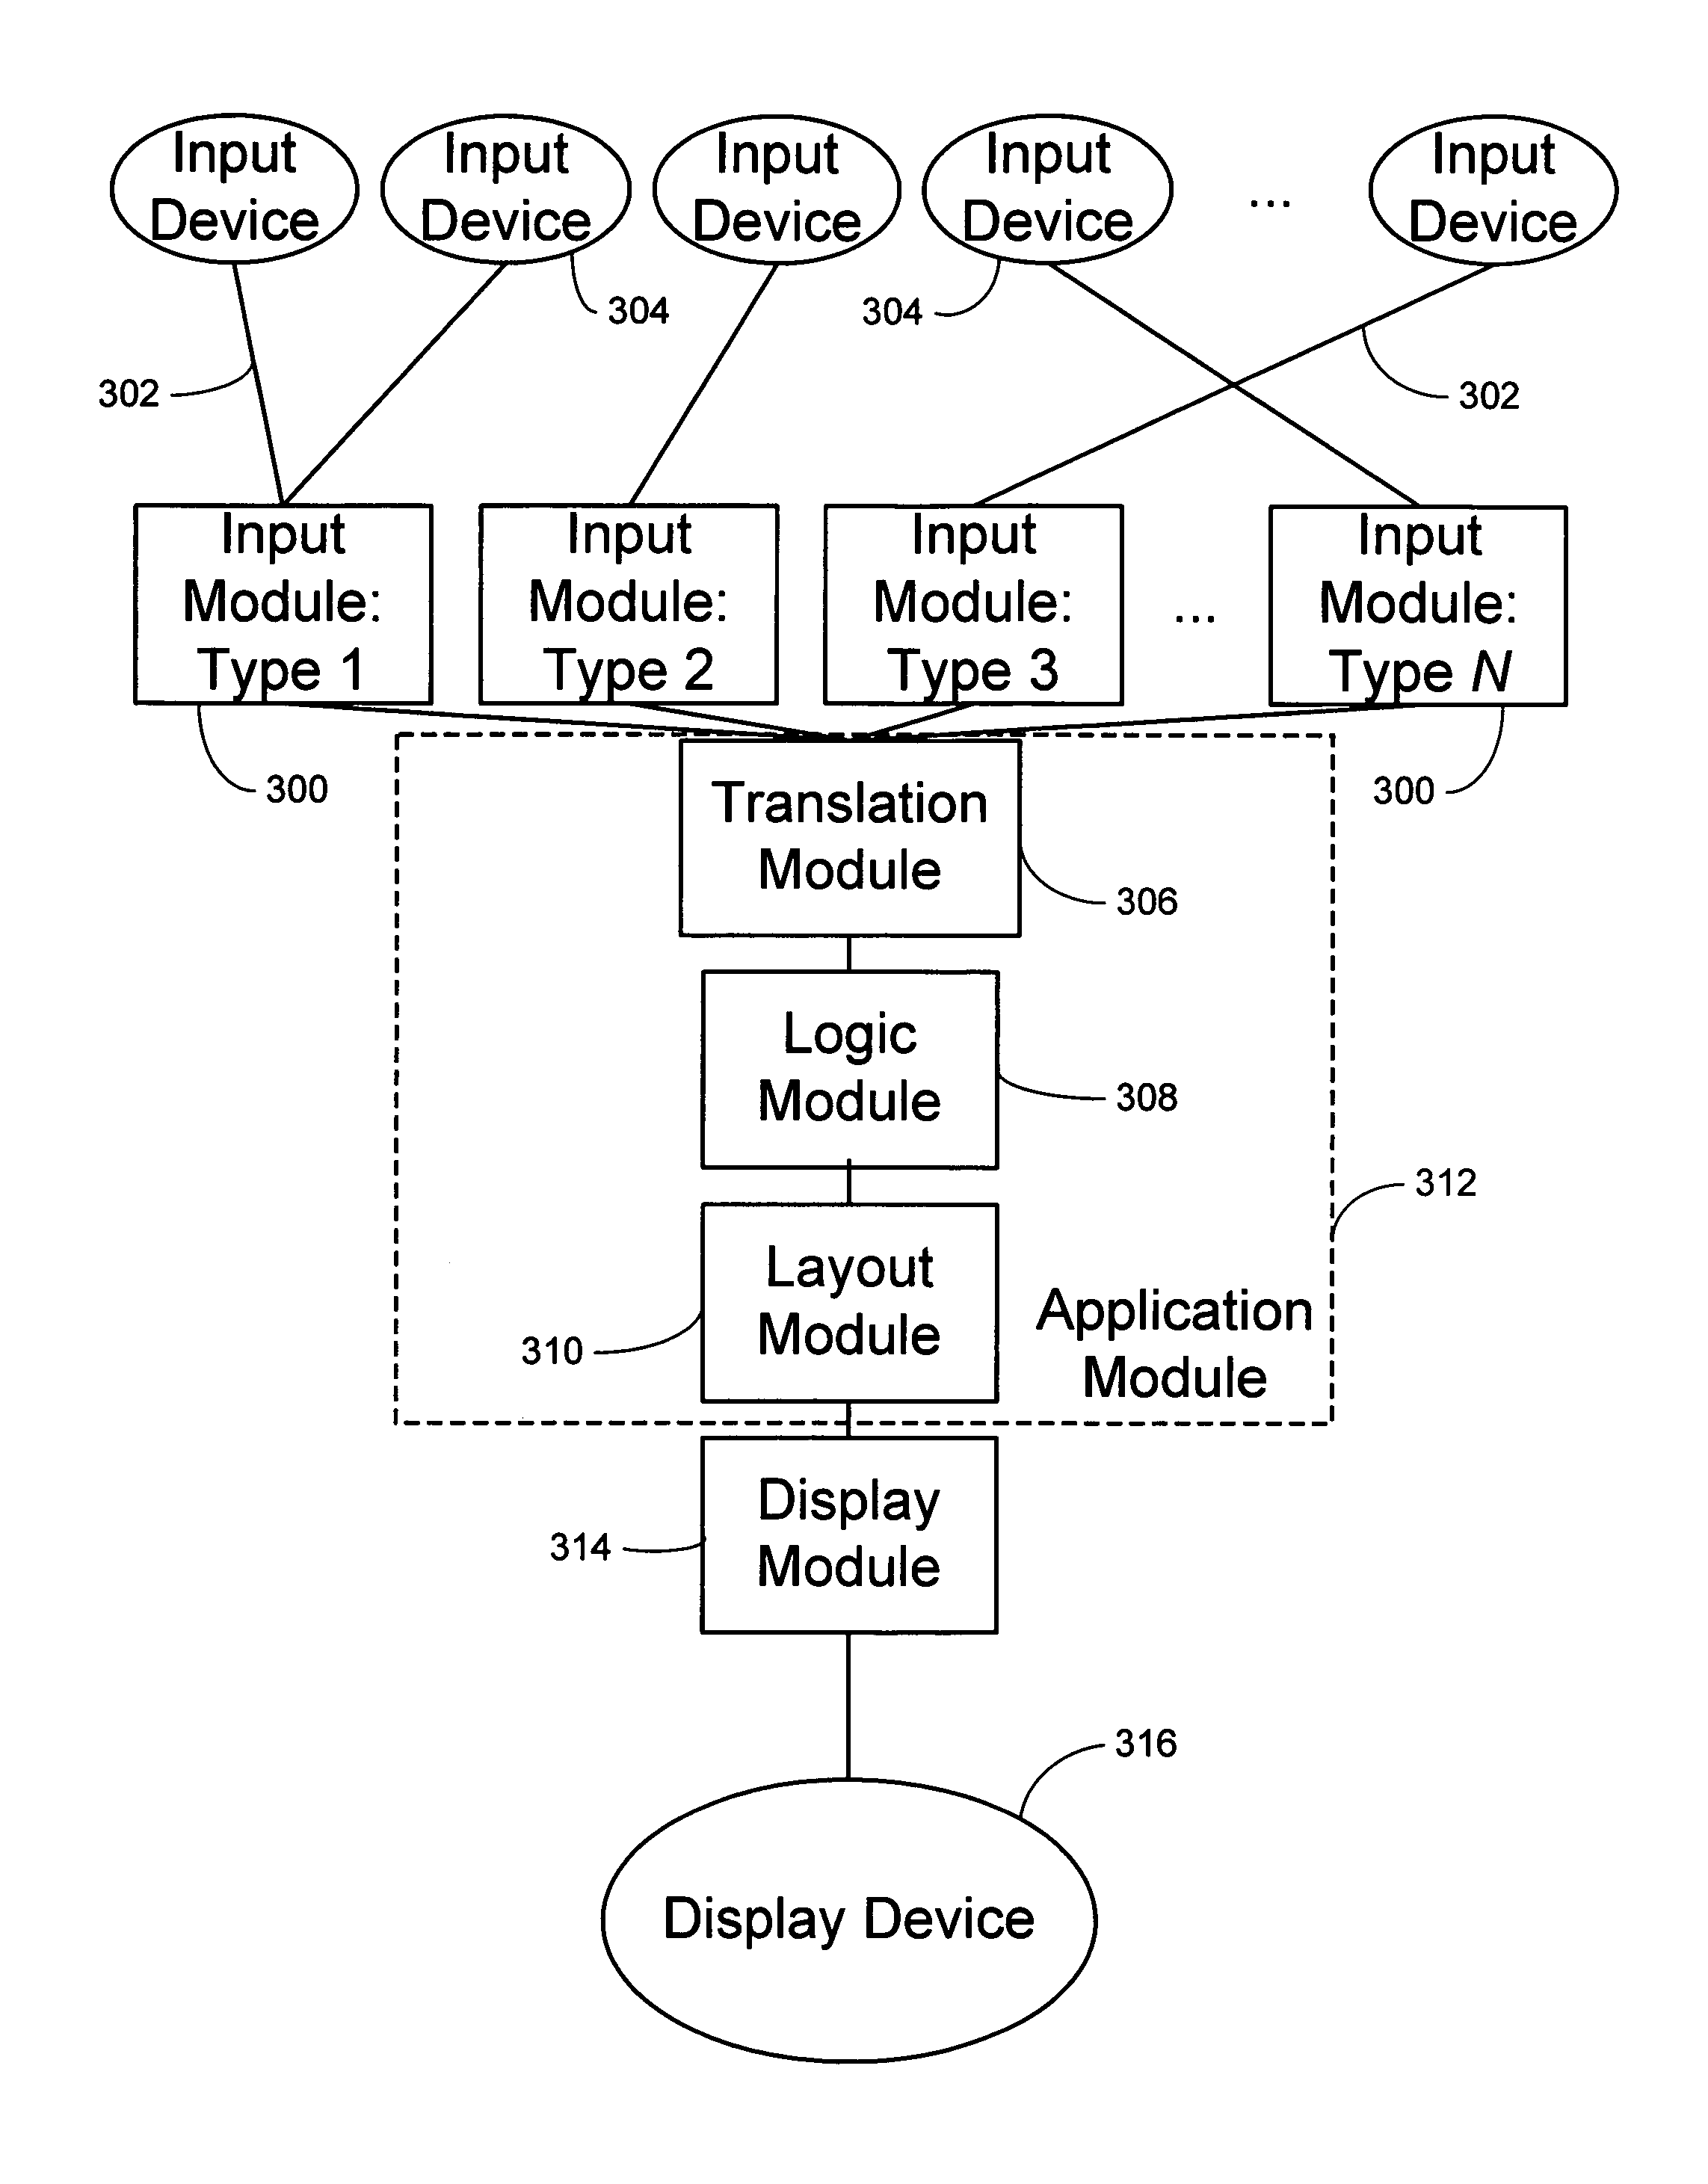 System and process for controlling a shared display given inputs from multiple users using multiple input modalities